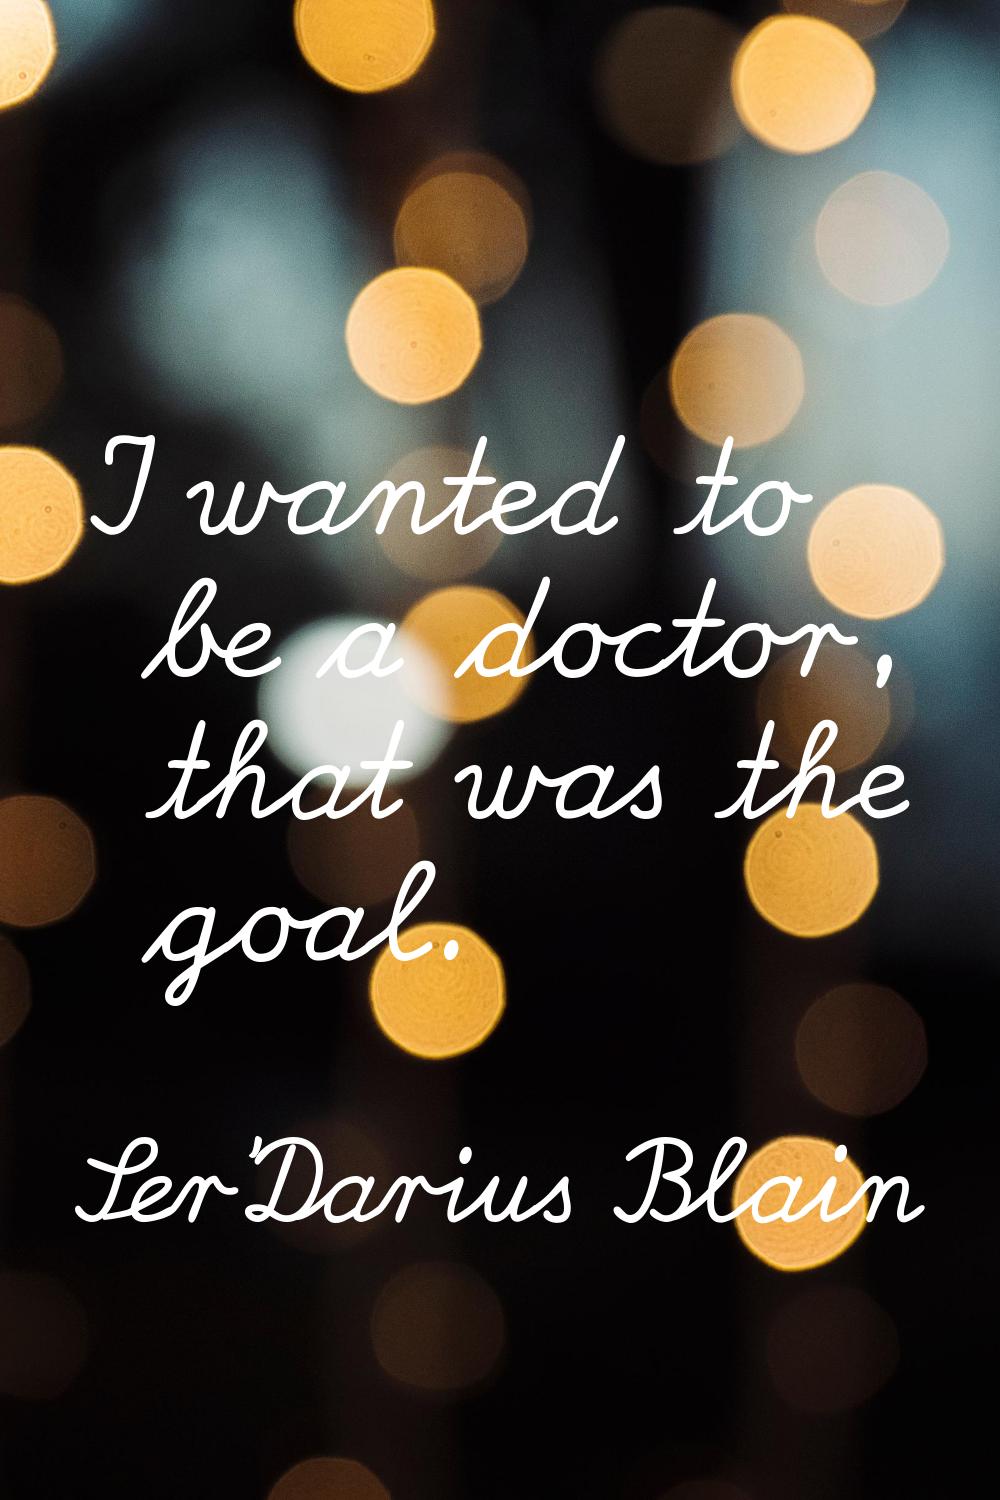 I wanted to be a doctor, that was the goal.